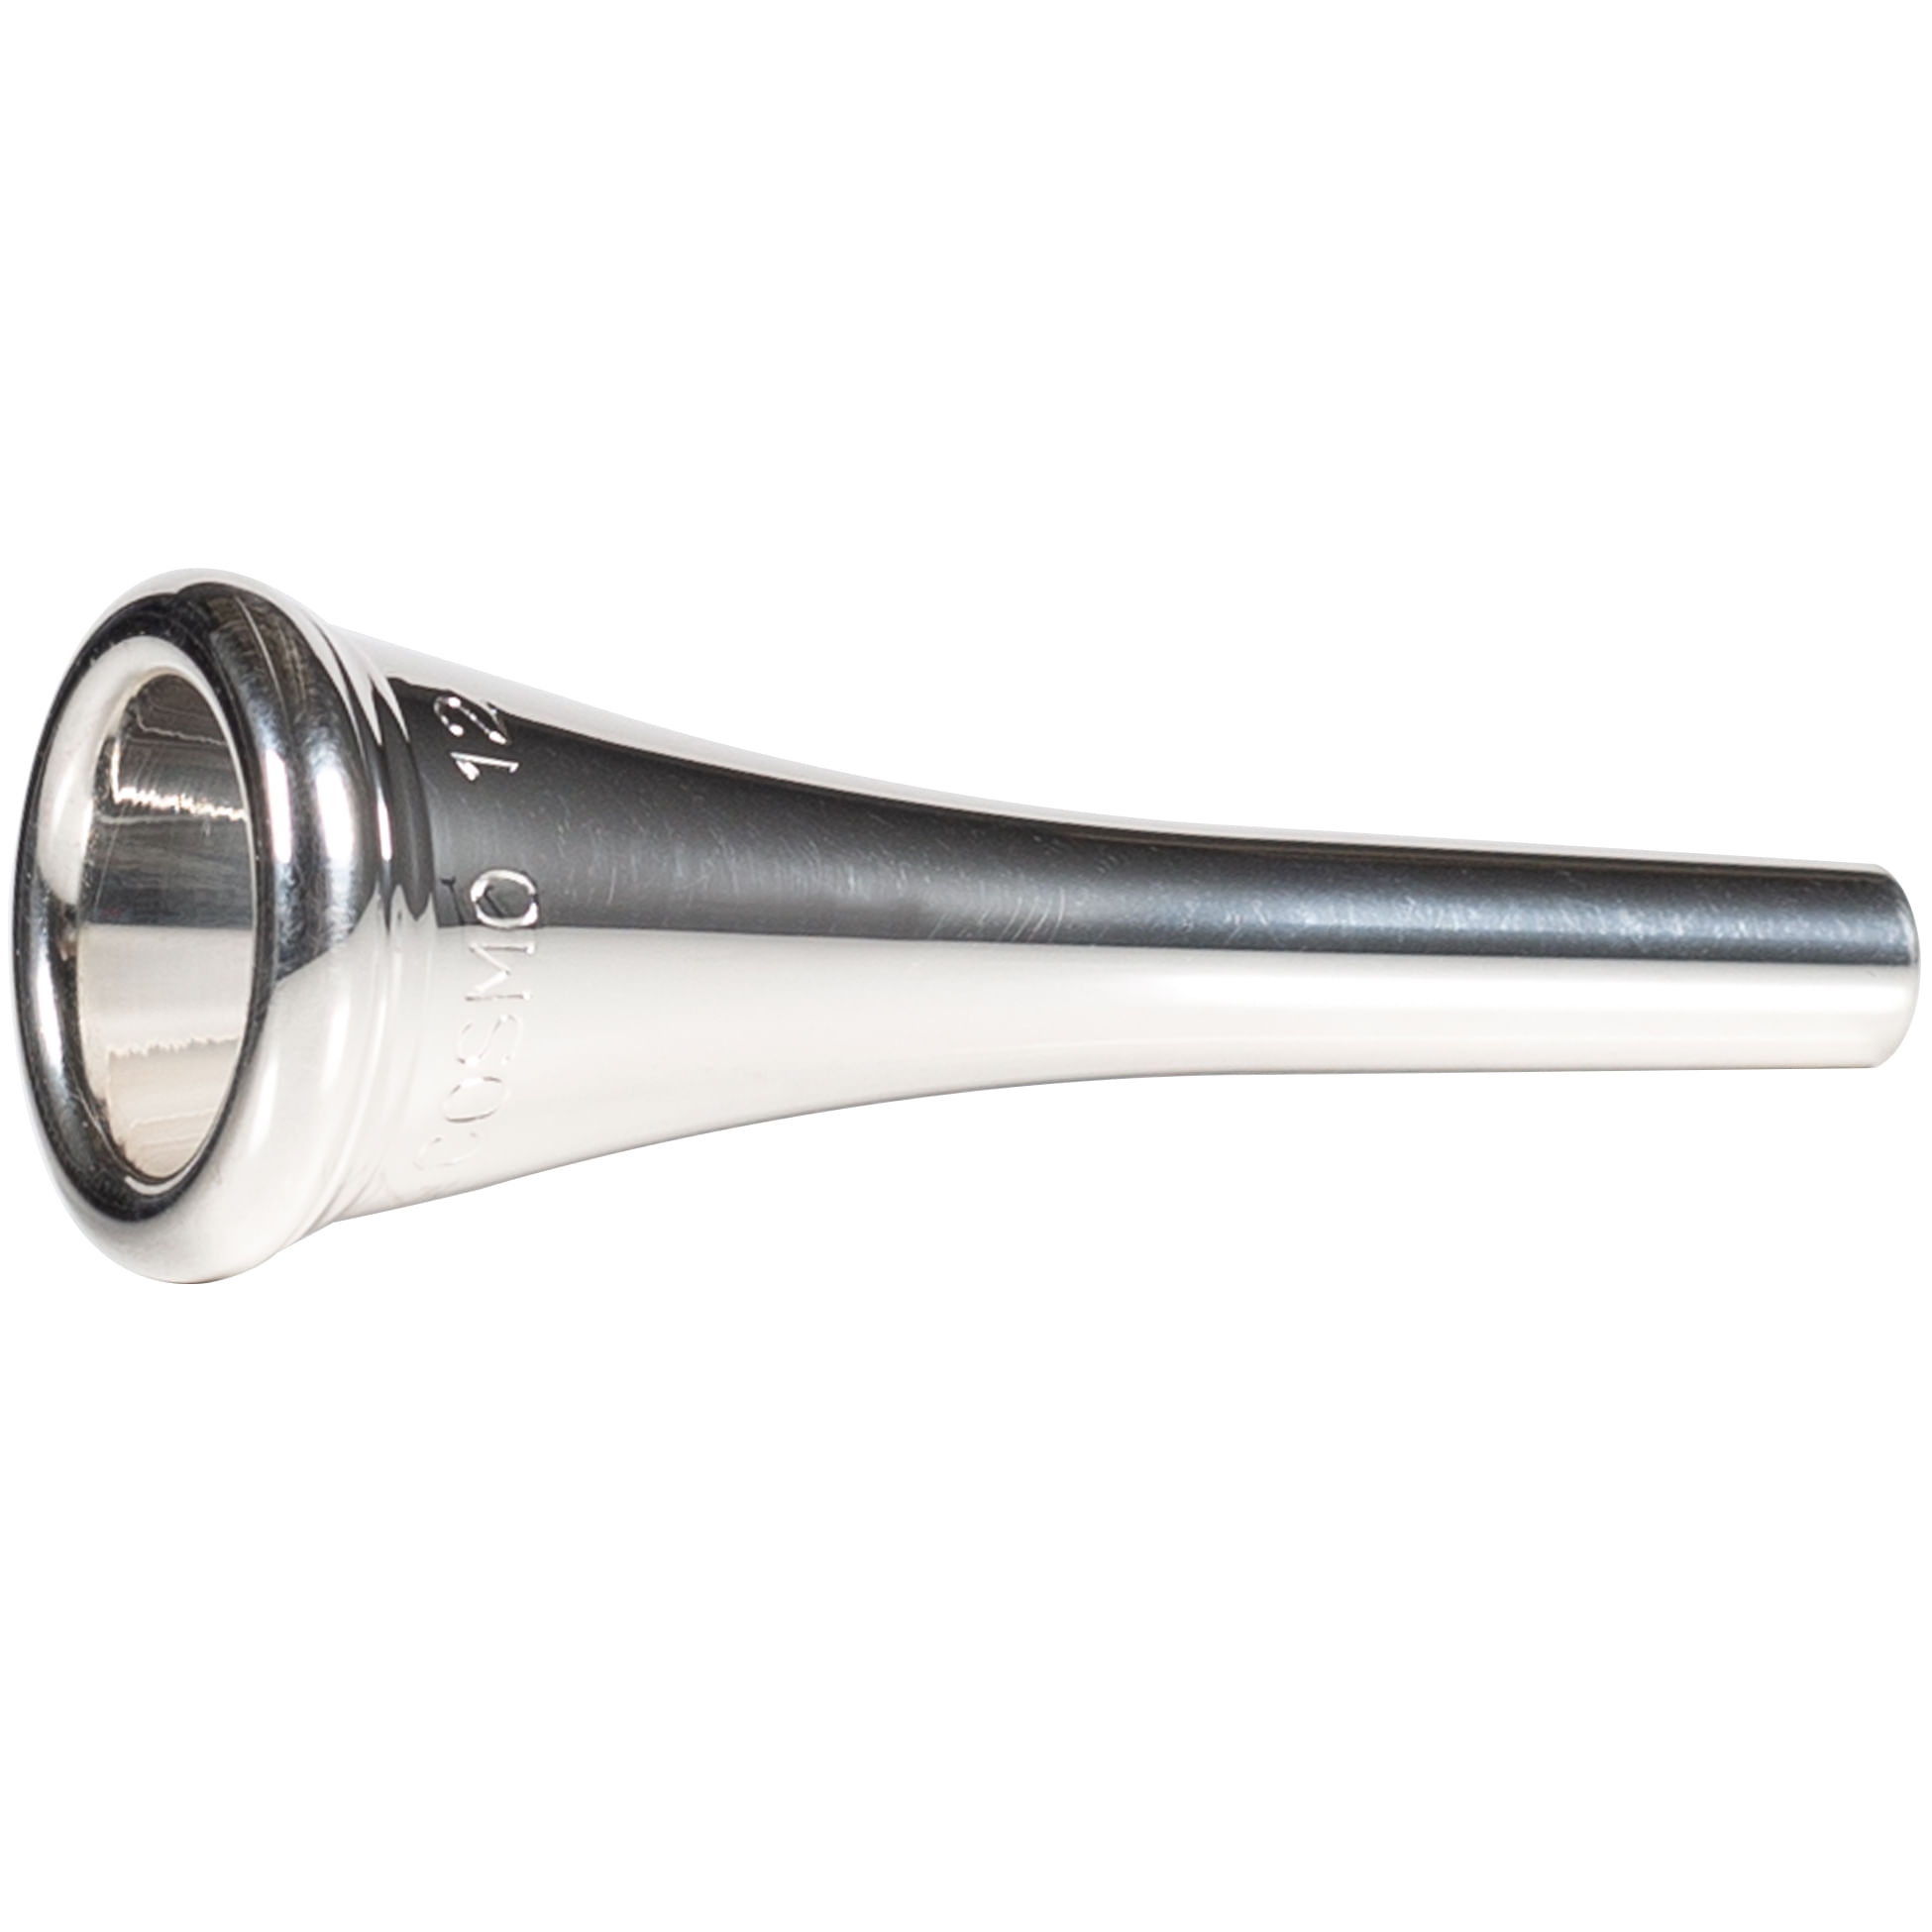 What You Need to Know About French Horn Mouthpieces